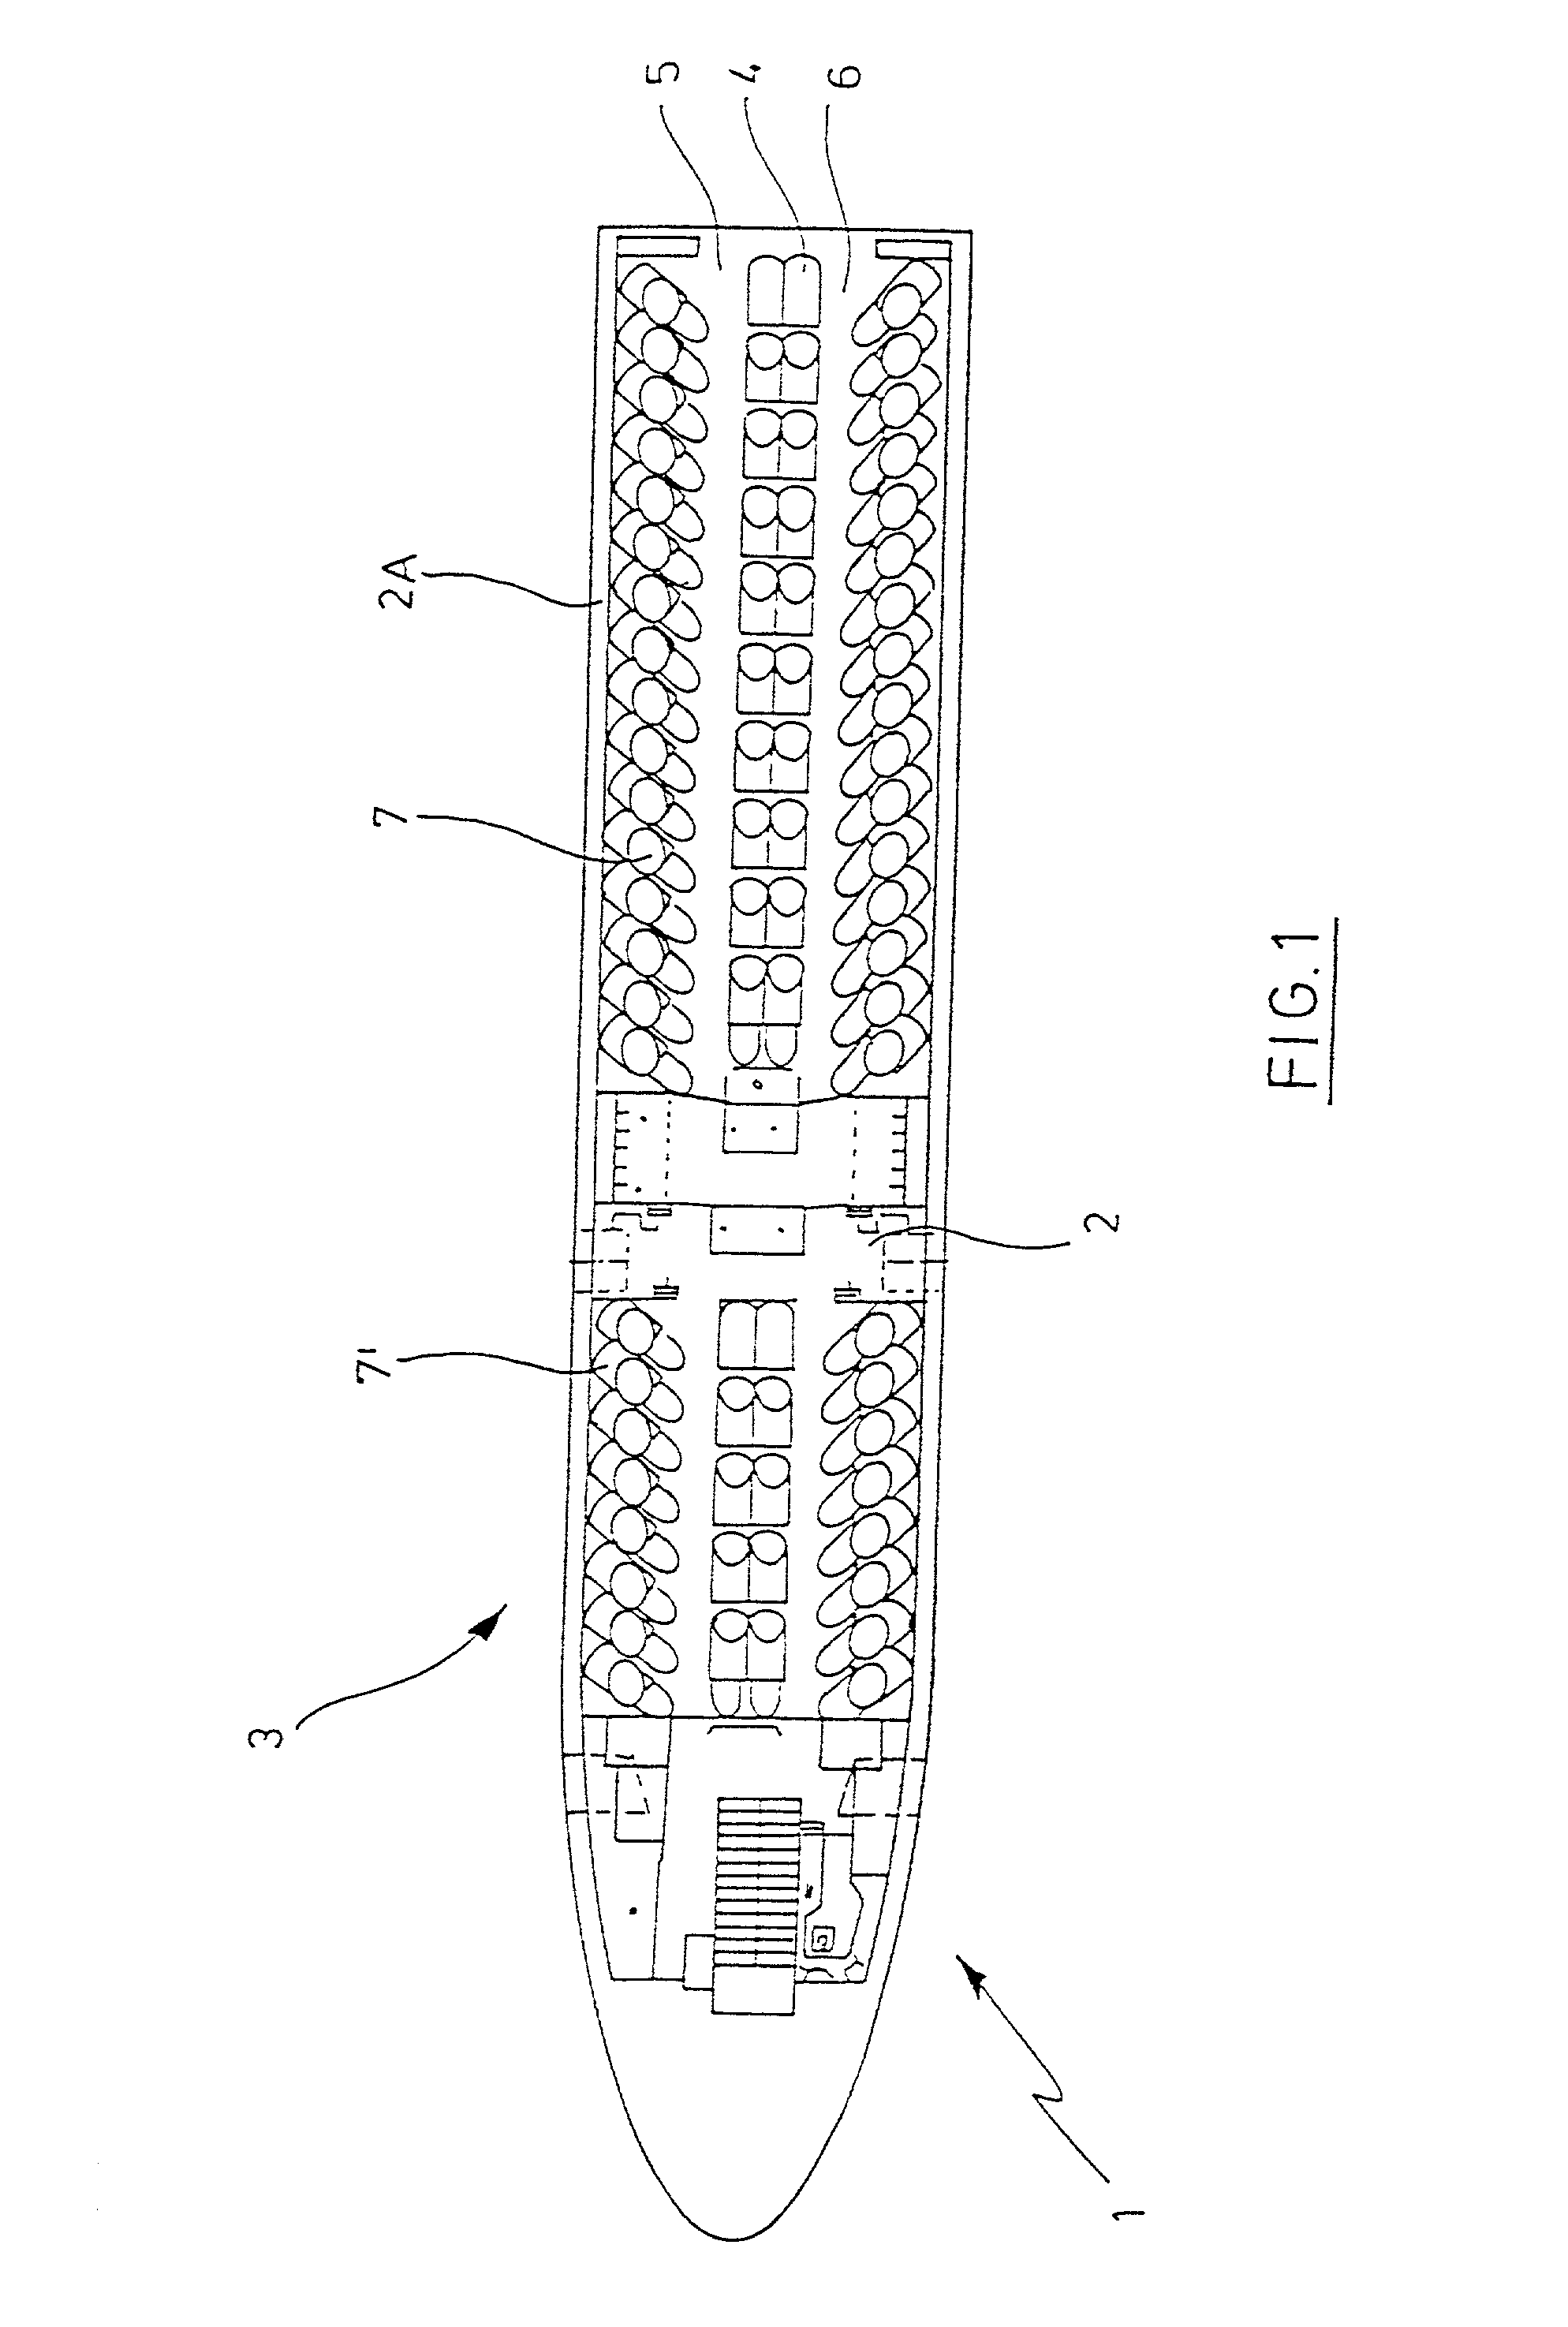 Aircraft passenger cabin with rotatable passenger seats